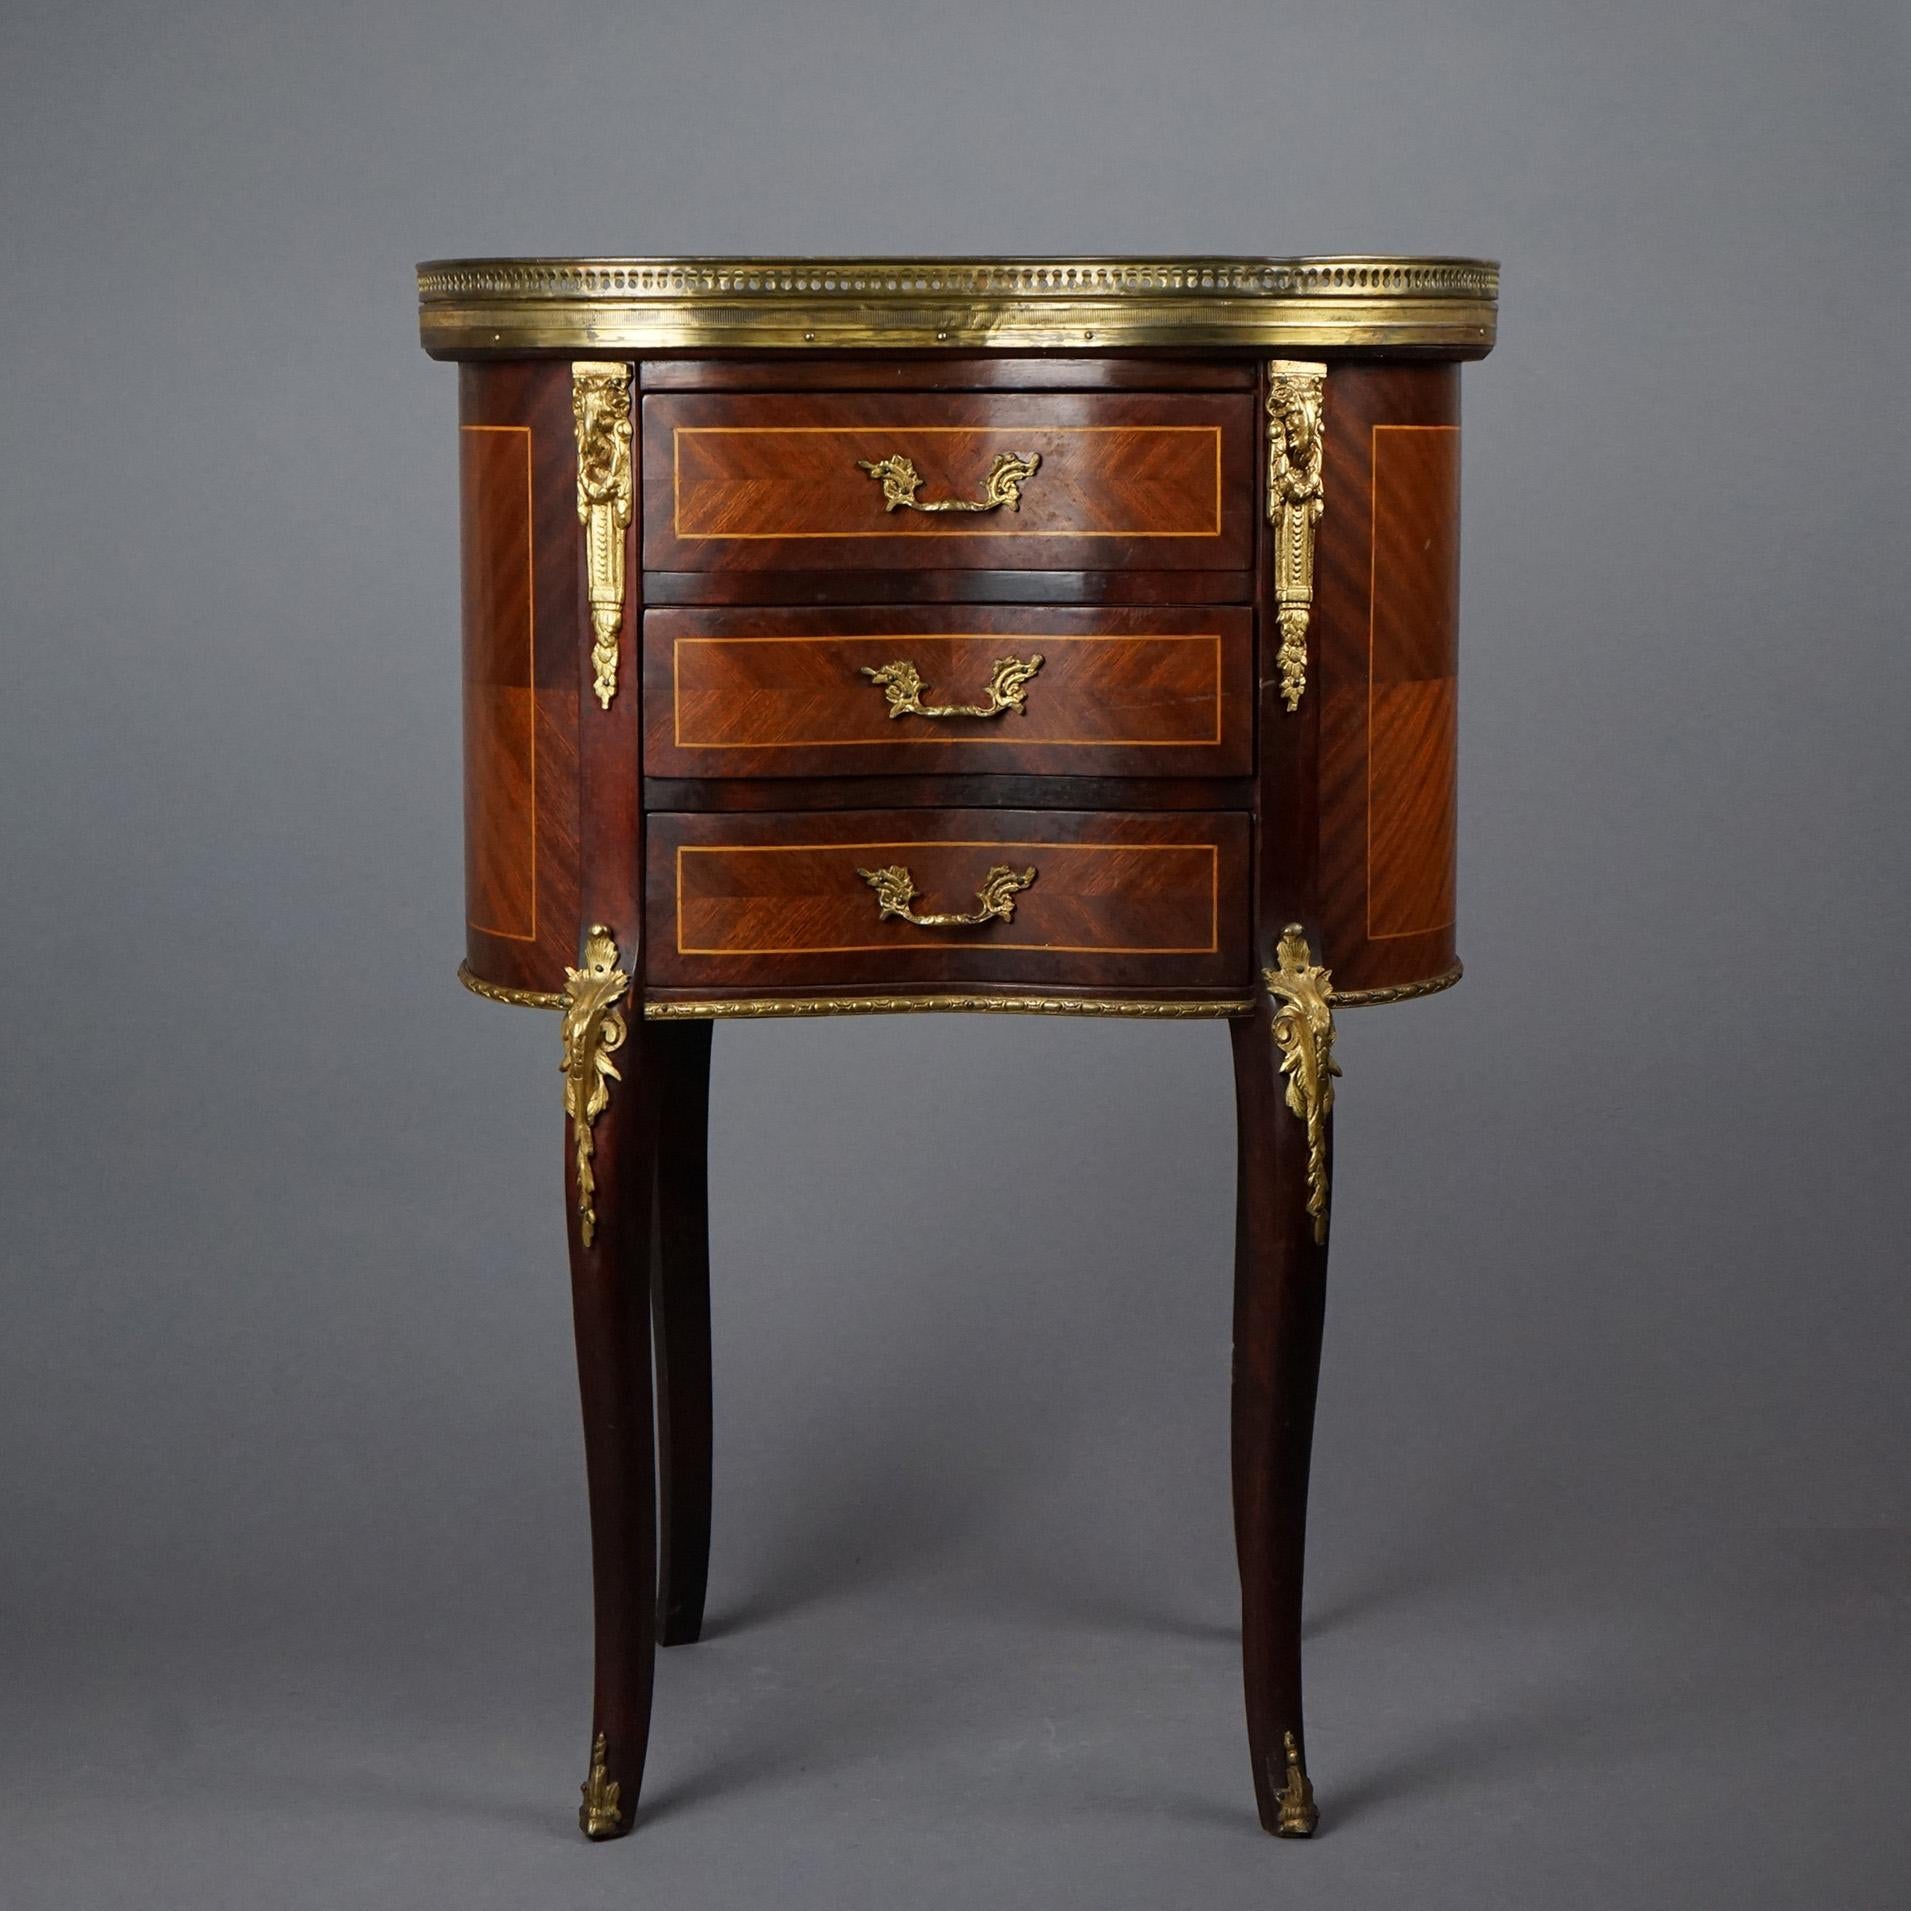 Cast Antique French Mahogany, Kingwood, Marble & Ormolu Kidney Shaped Side Table For Sale